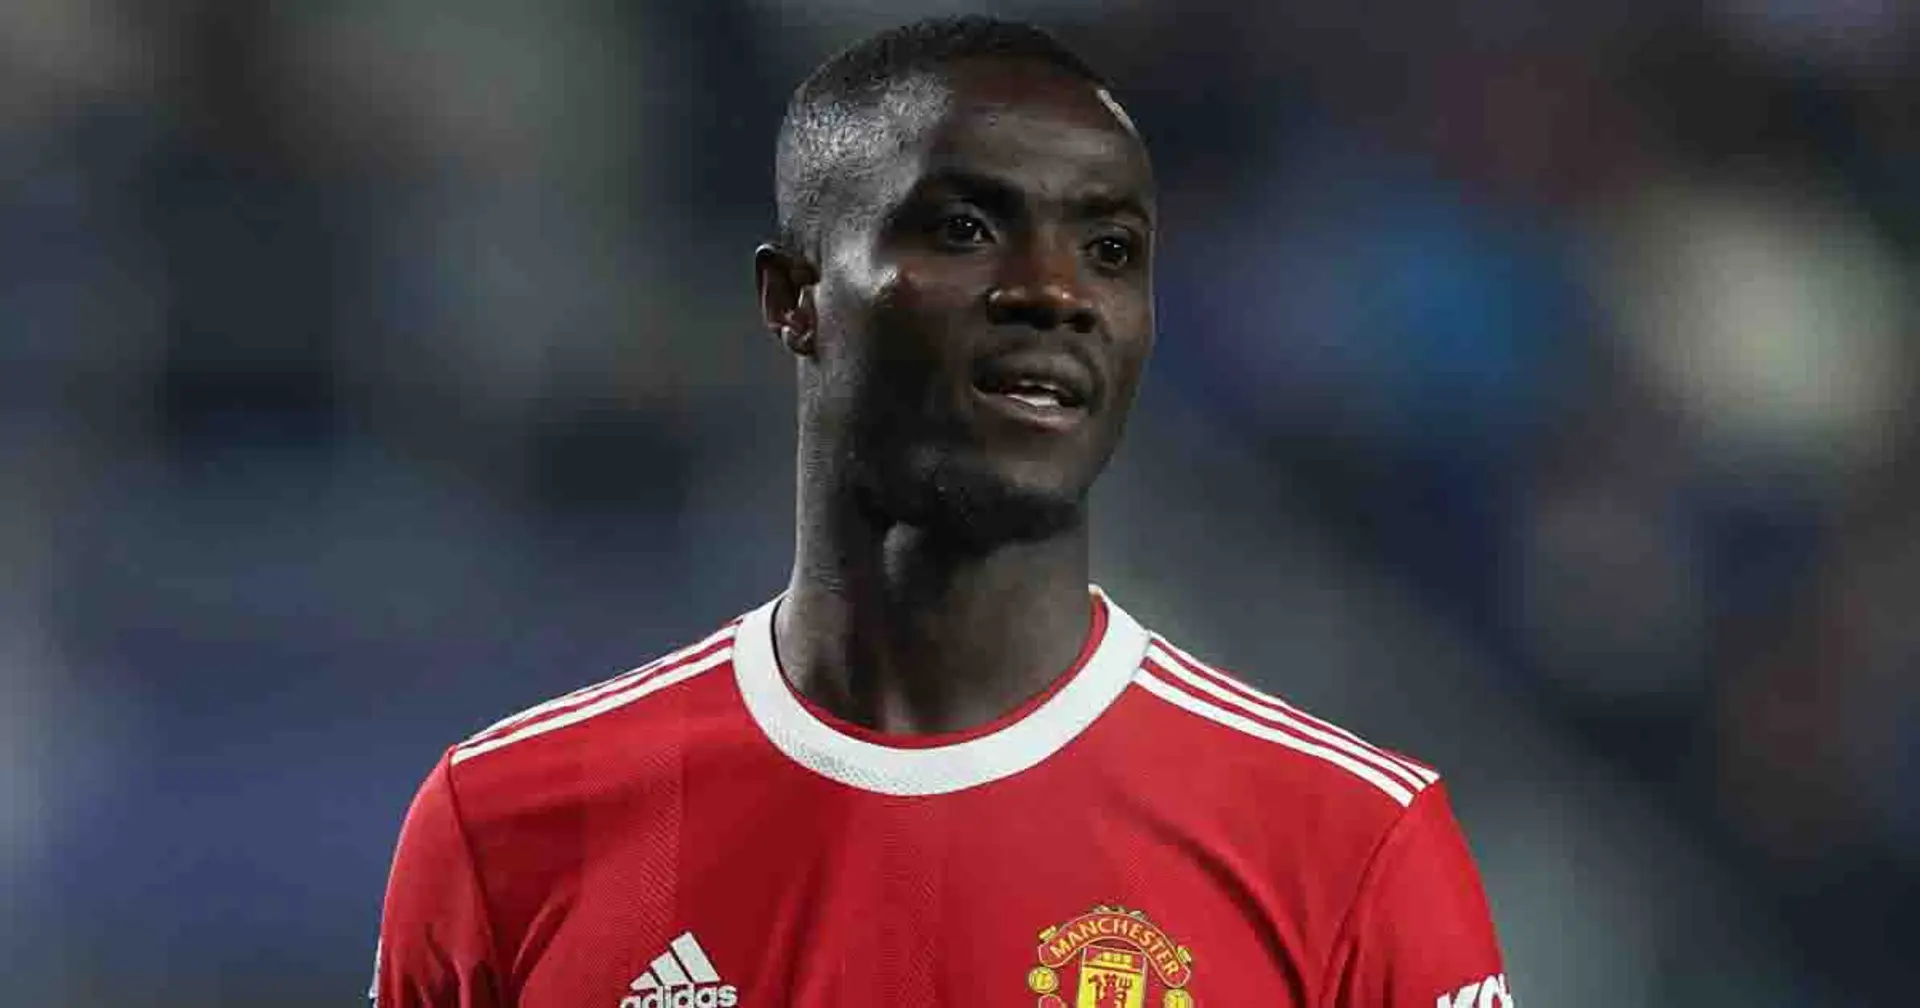 Man United sell Eric Bailly to Besiktas